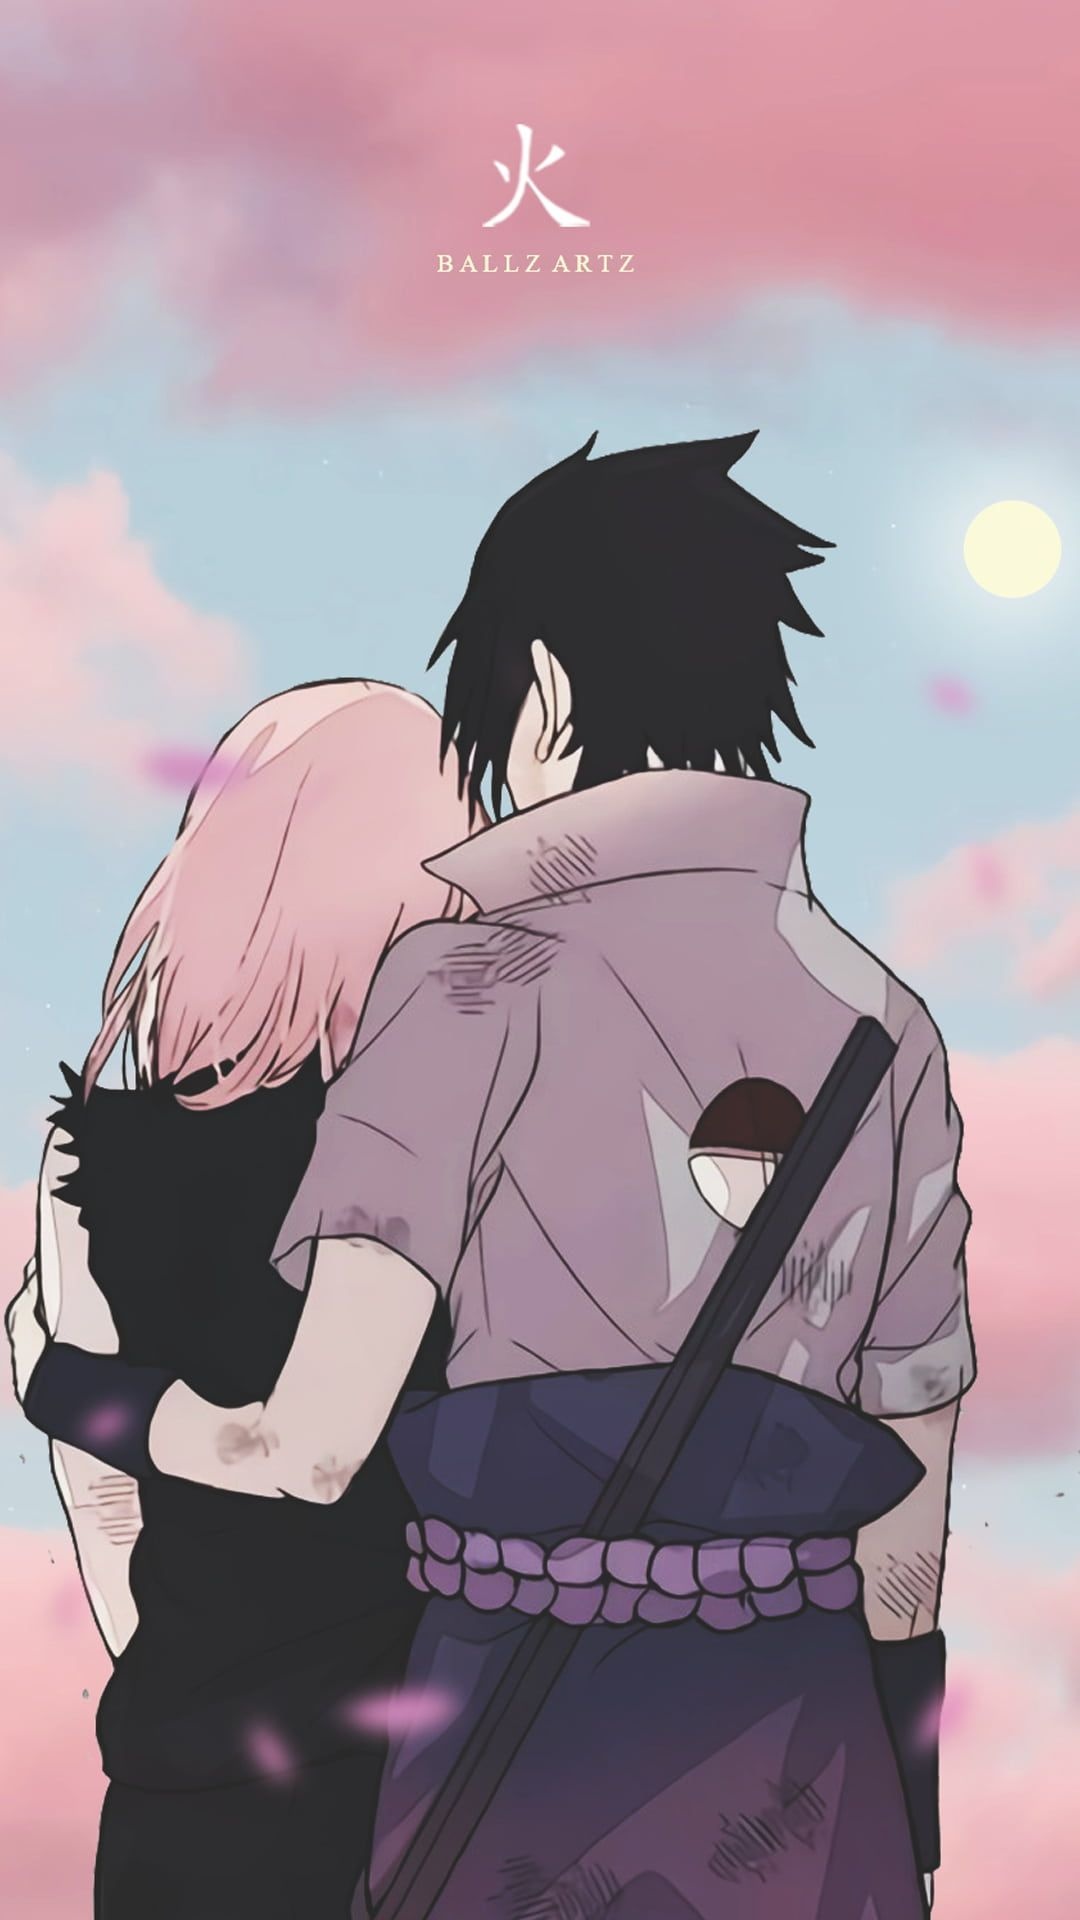 cute couple anime wallpaper for phone